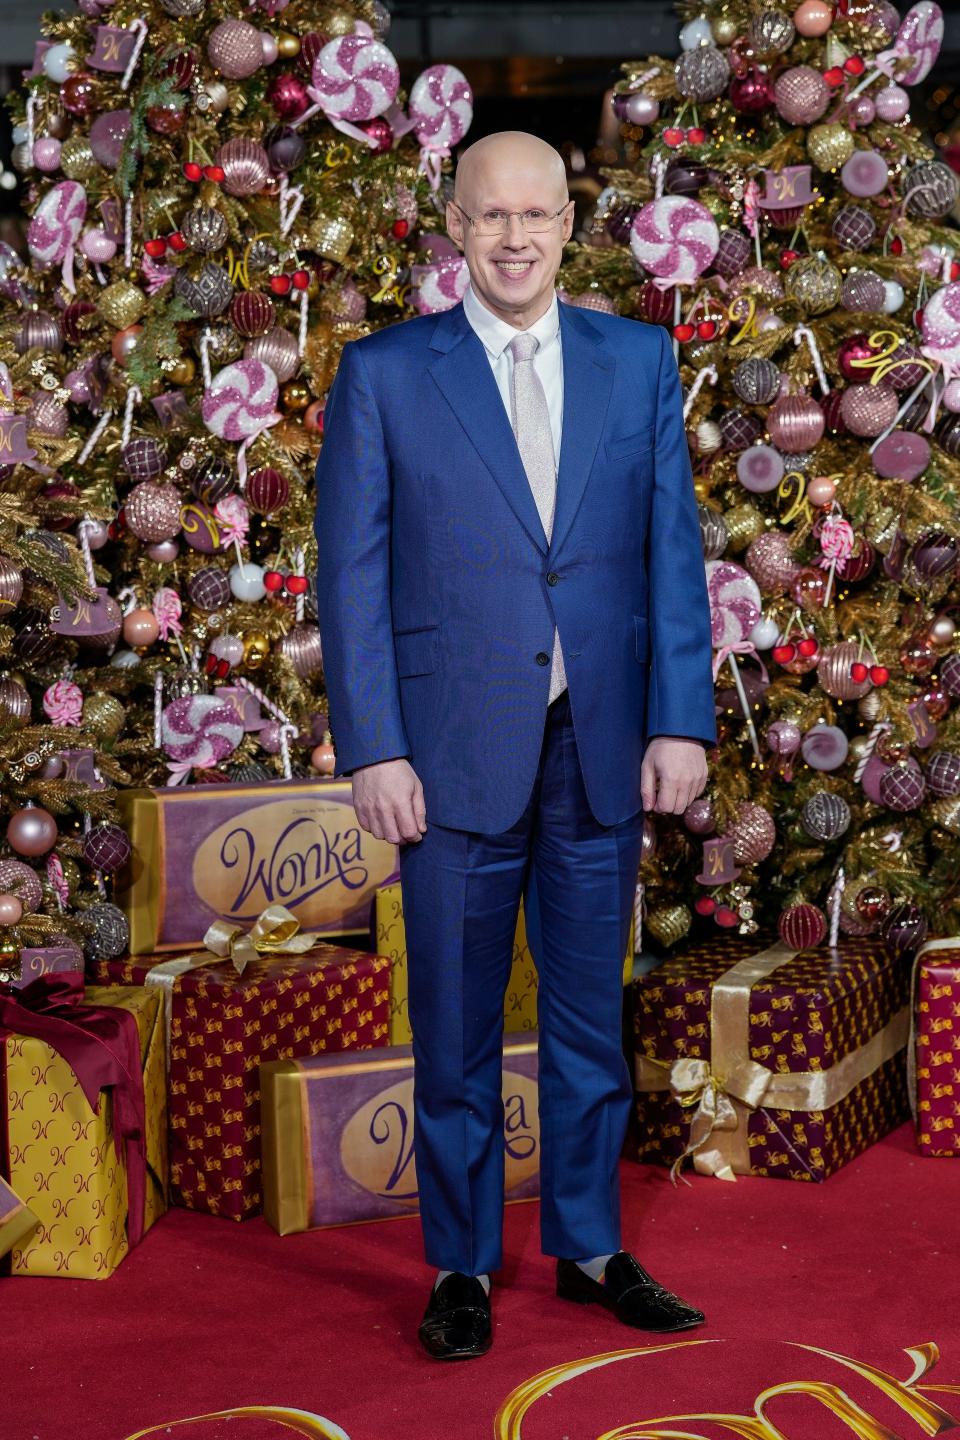 Matt Lucas poses for photographers upon arrival at the world premiere of the film 'Wonka' in London.